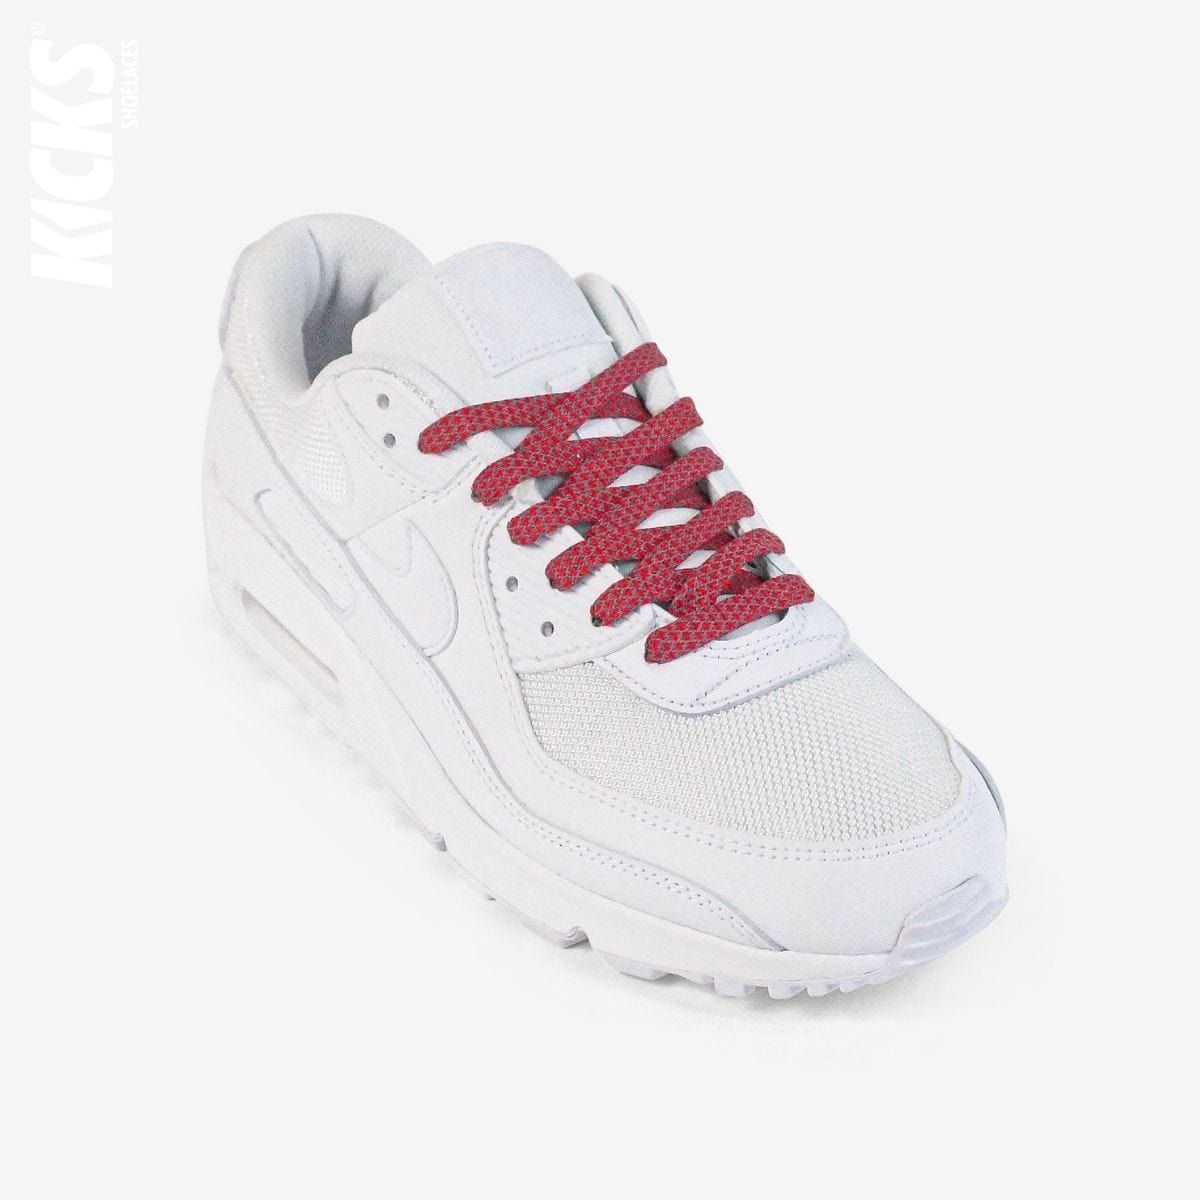 red-reflective-colored-shoelaces-on-white-sneakers